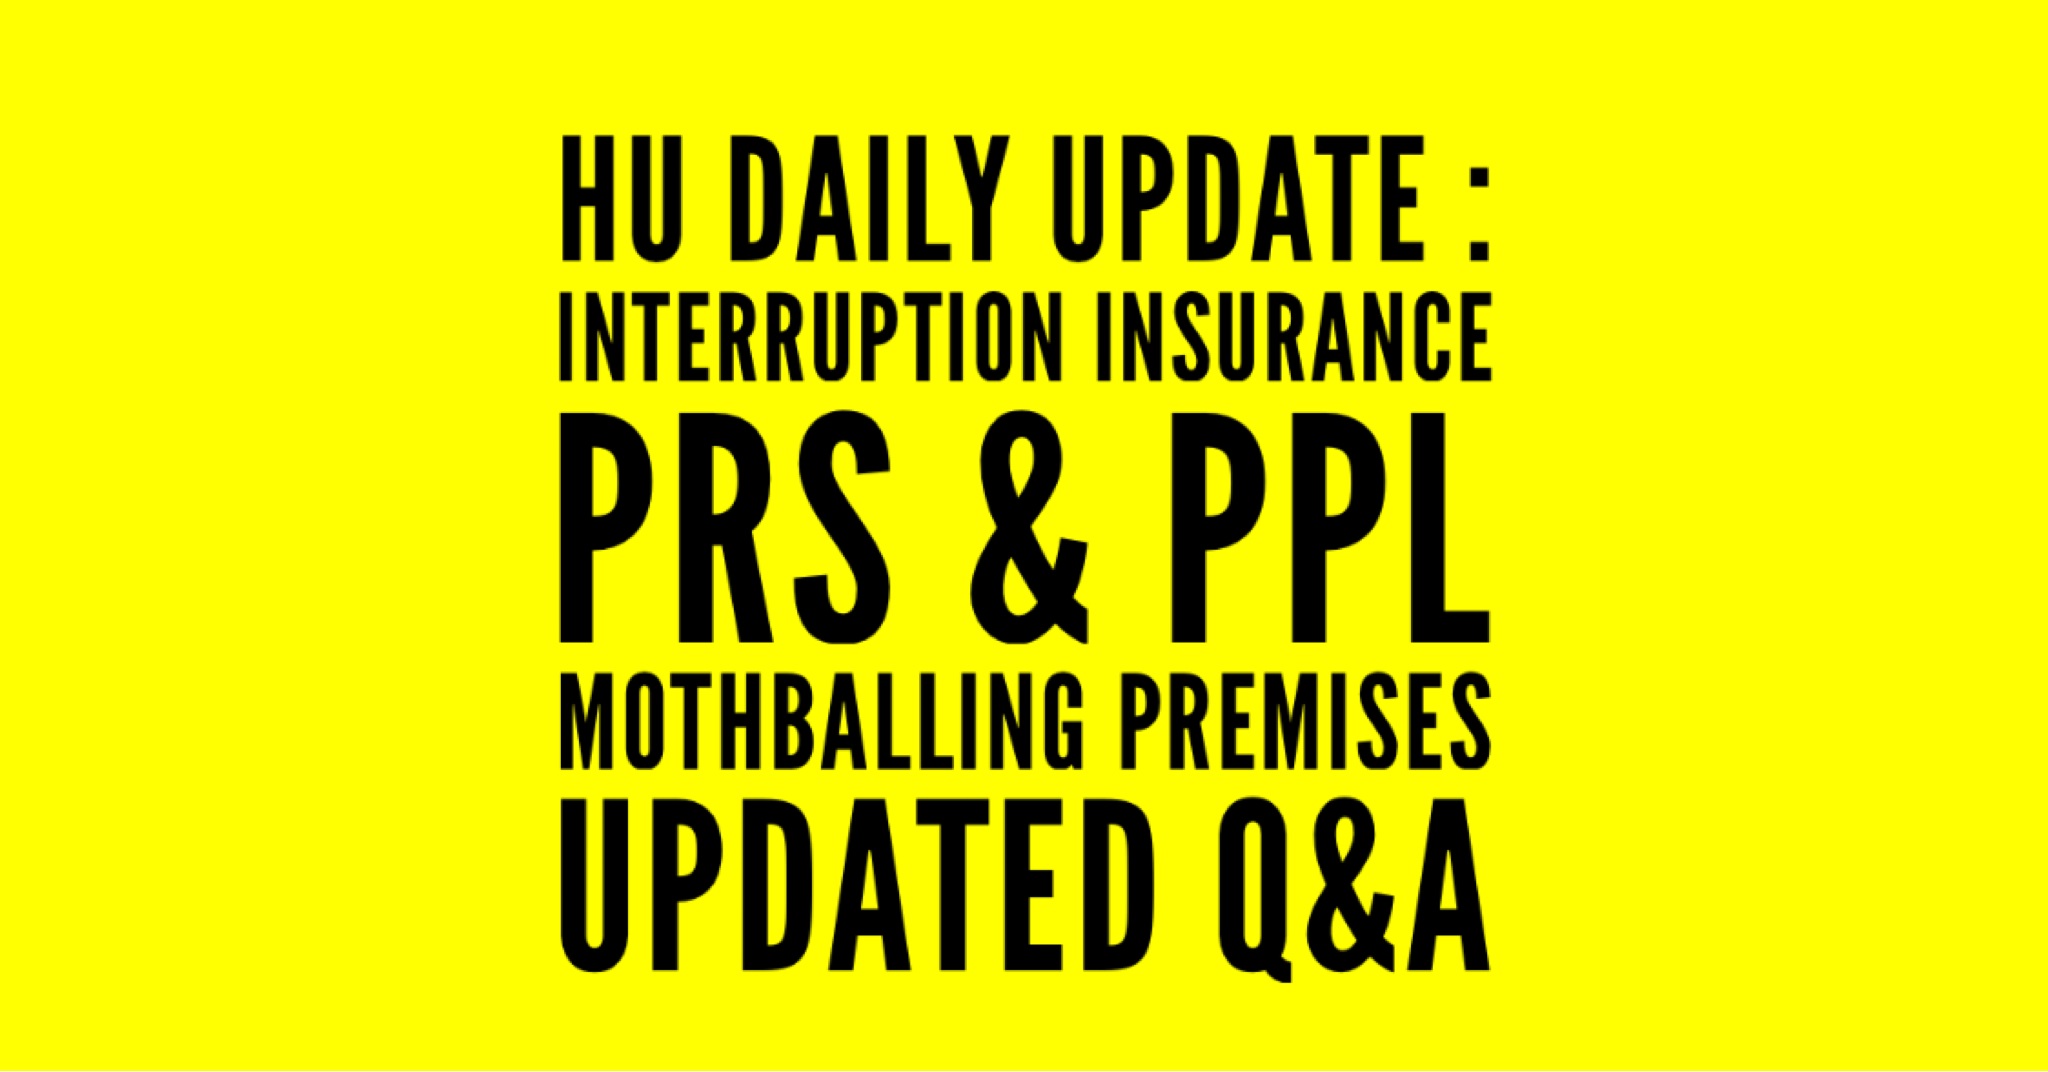 DAILY UPDATE Interruption Insurance PRS and PPL Mothballing Premises Updated Q and A